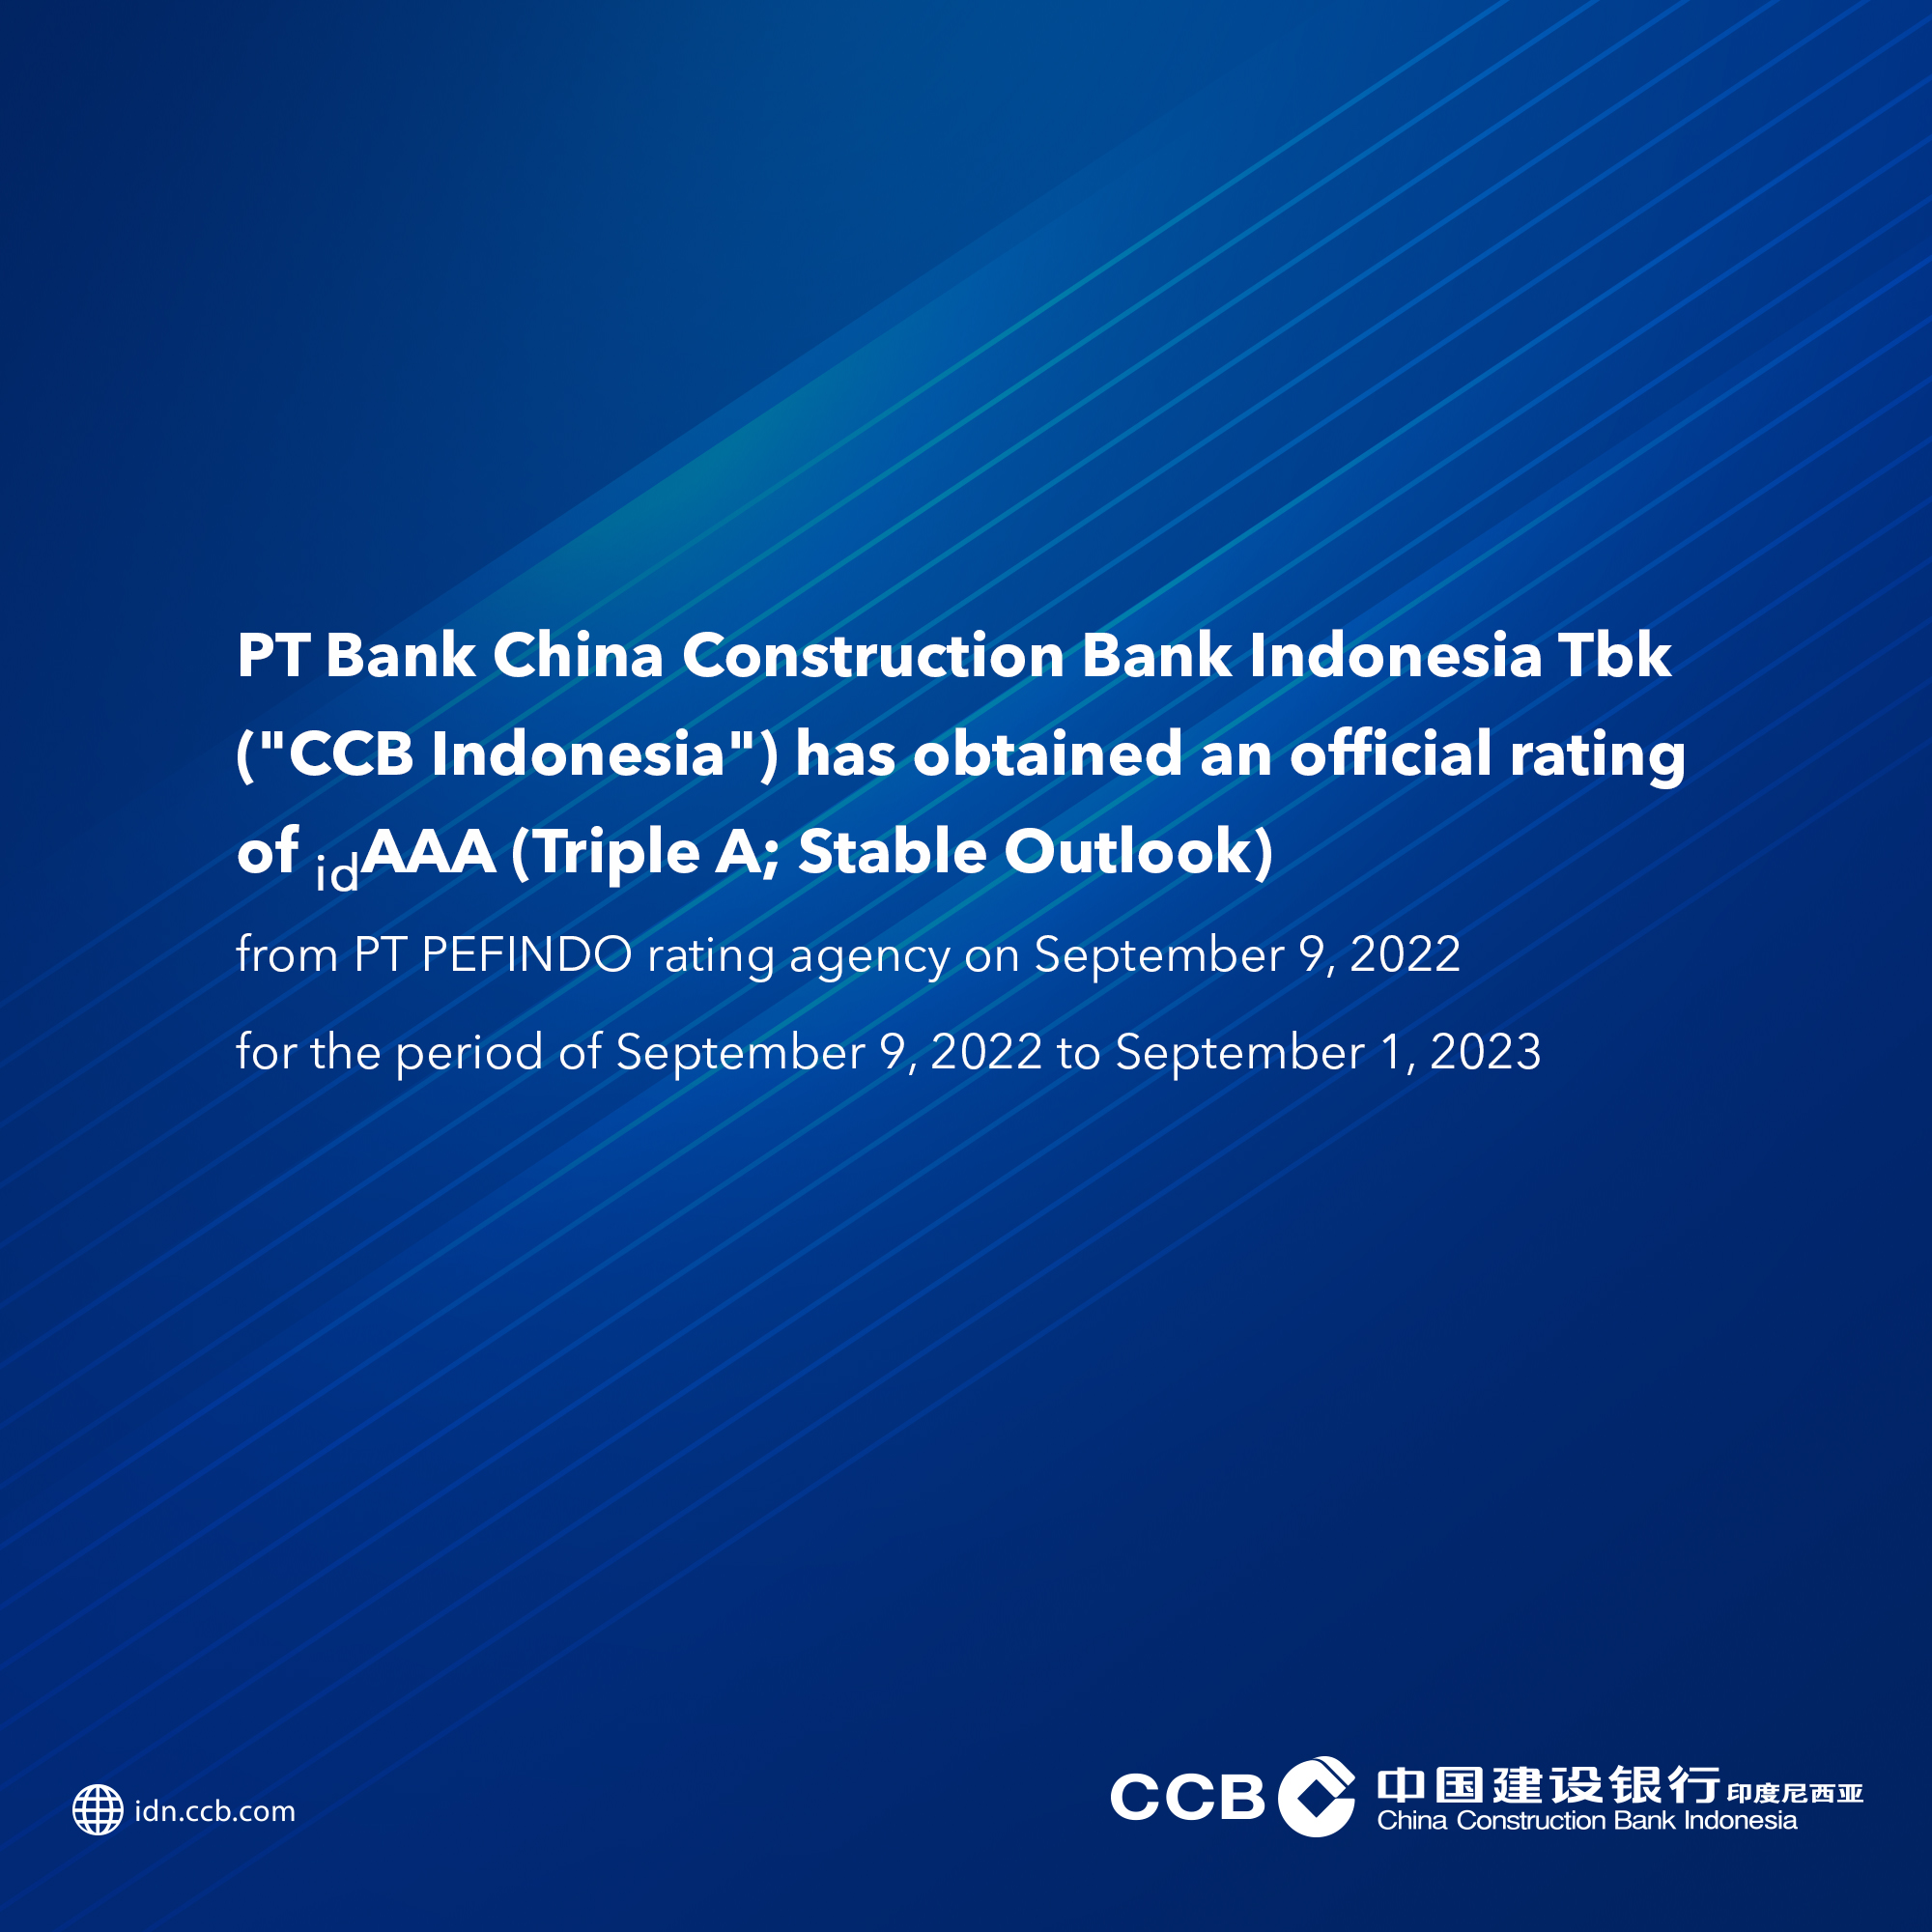 CCB Indonesia has obtained an official rating of idAAA